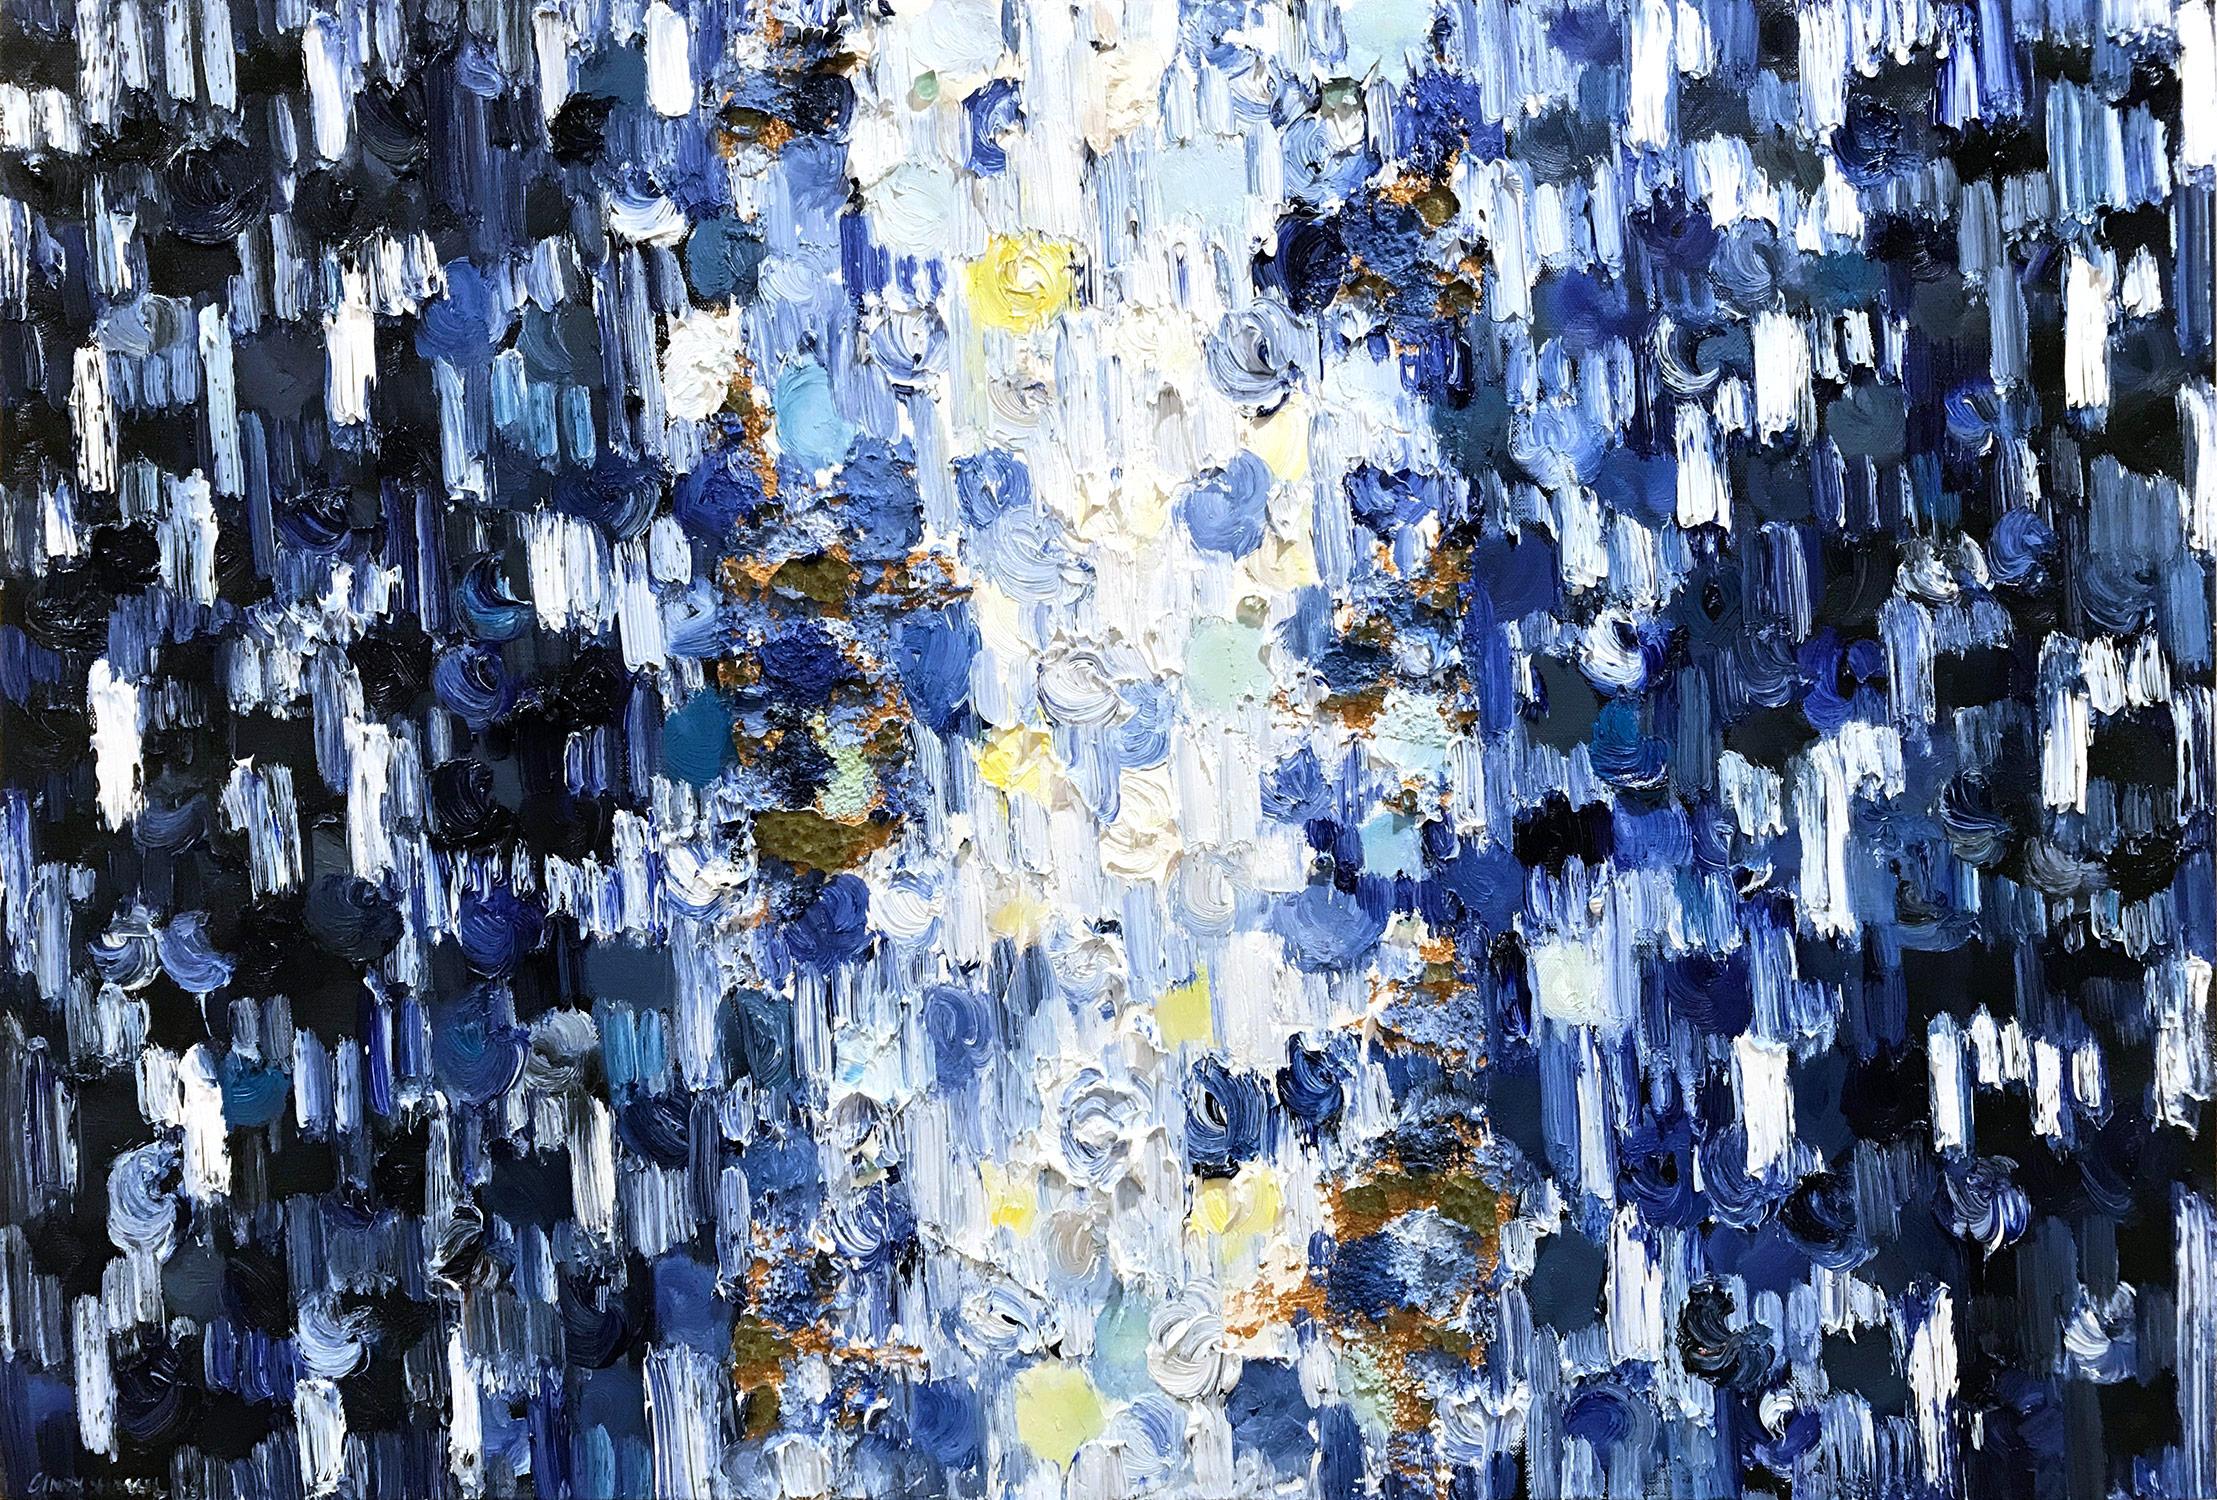 Cindy Shaoul Abstract Painting - "Dripping Dots - Kingston" Blue & Black Gradient Abstract Oil Painting on Canvas